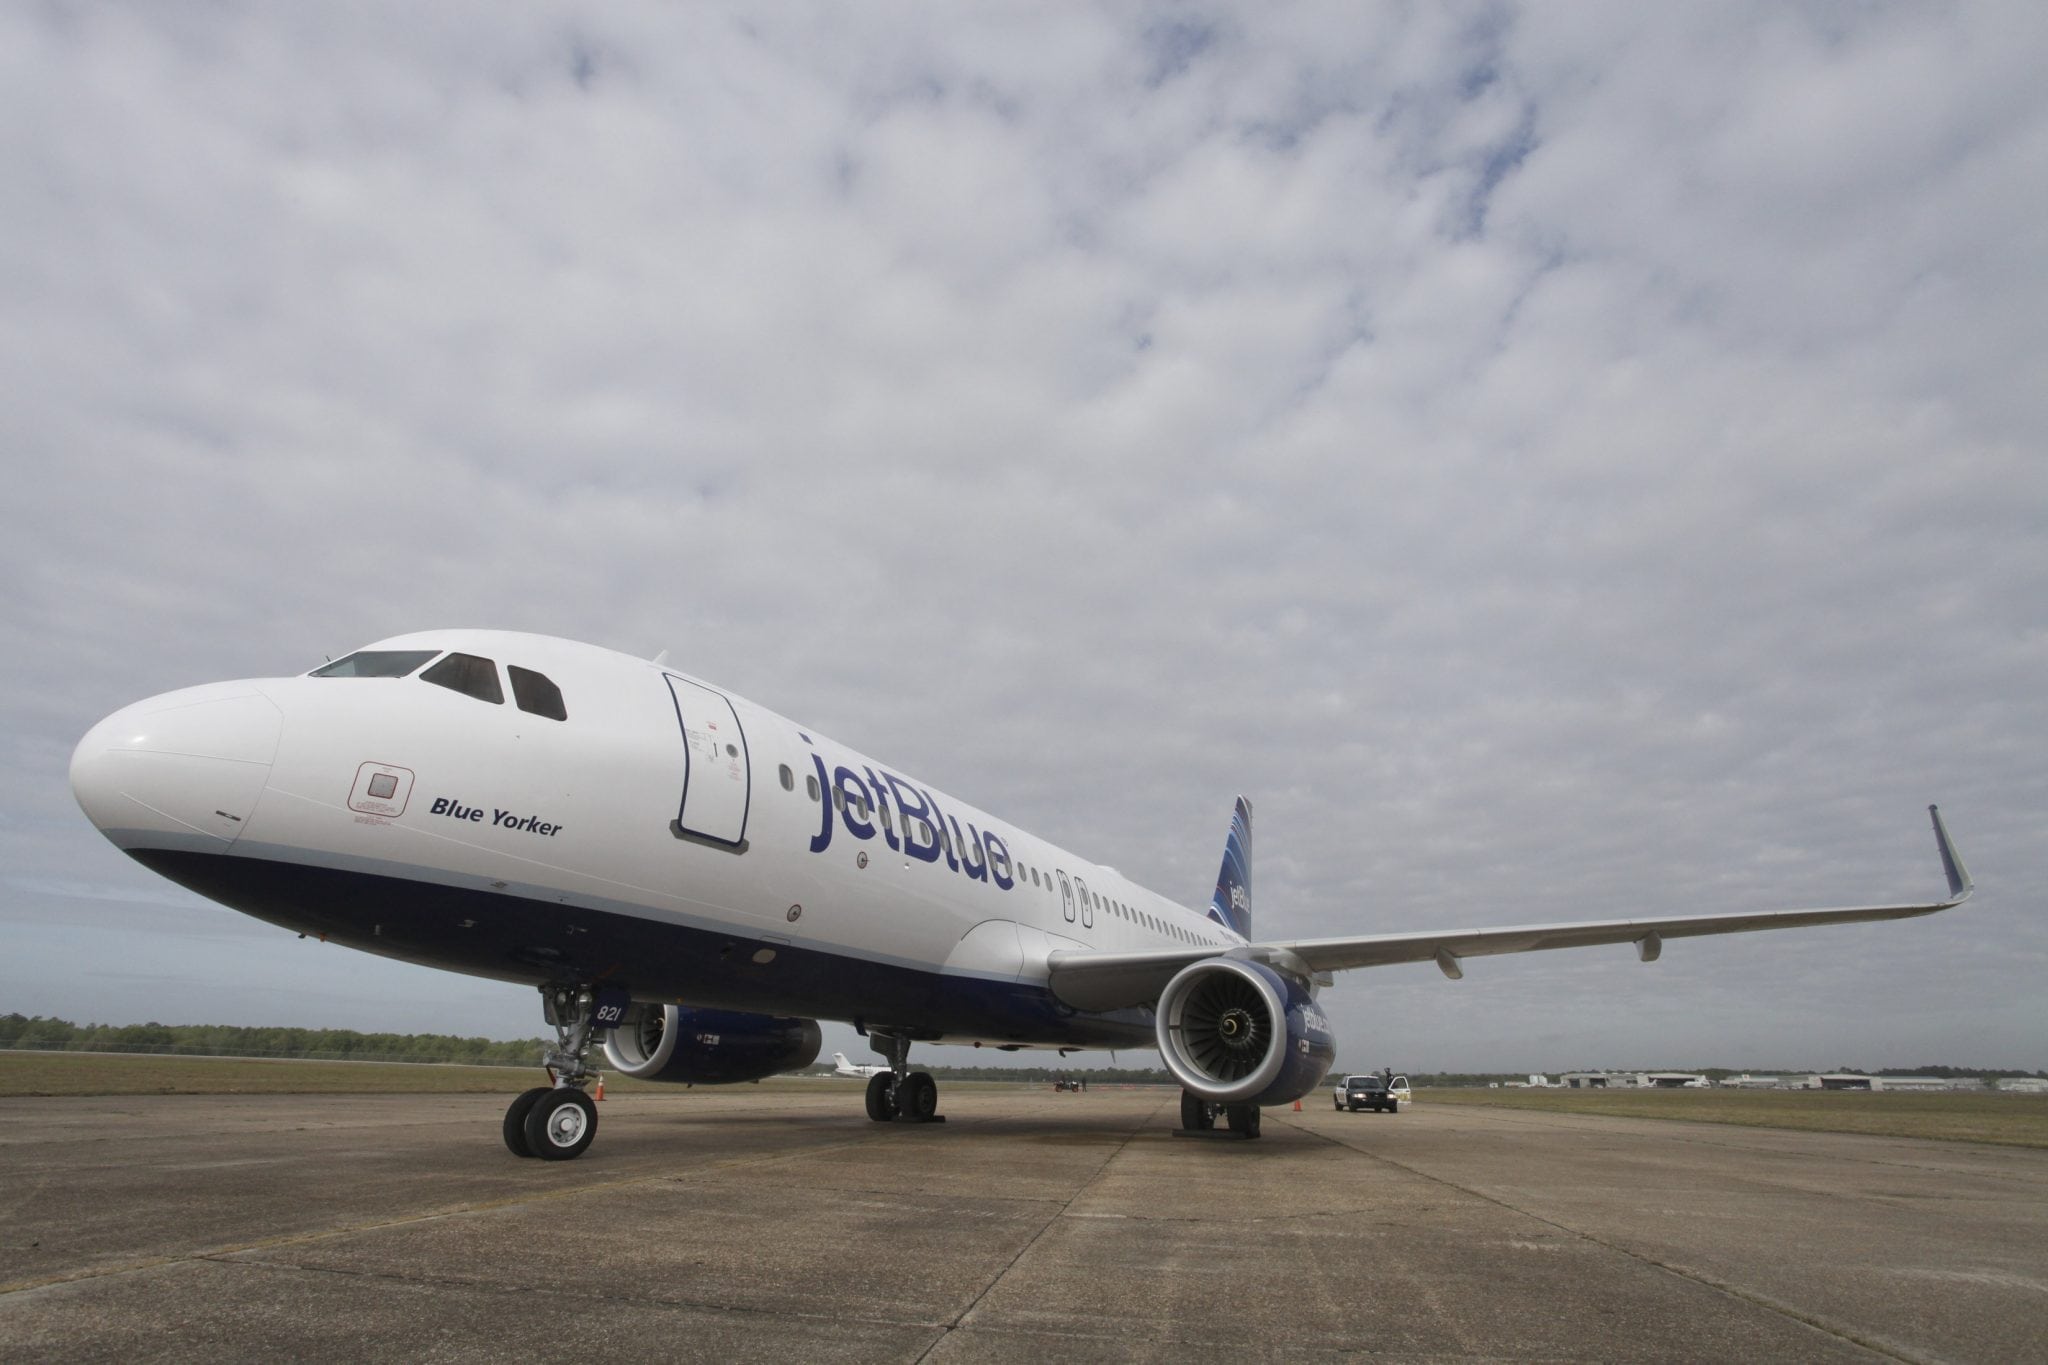 A JetBlue Airbus A320 air plane is pictured on the tarmac at a ground breaking ceremony for the first Airbus U.S. assembly plant in Mobile. 